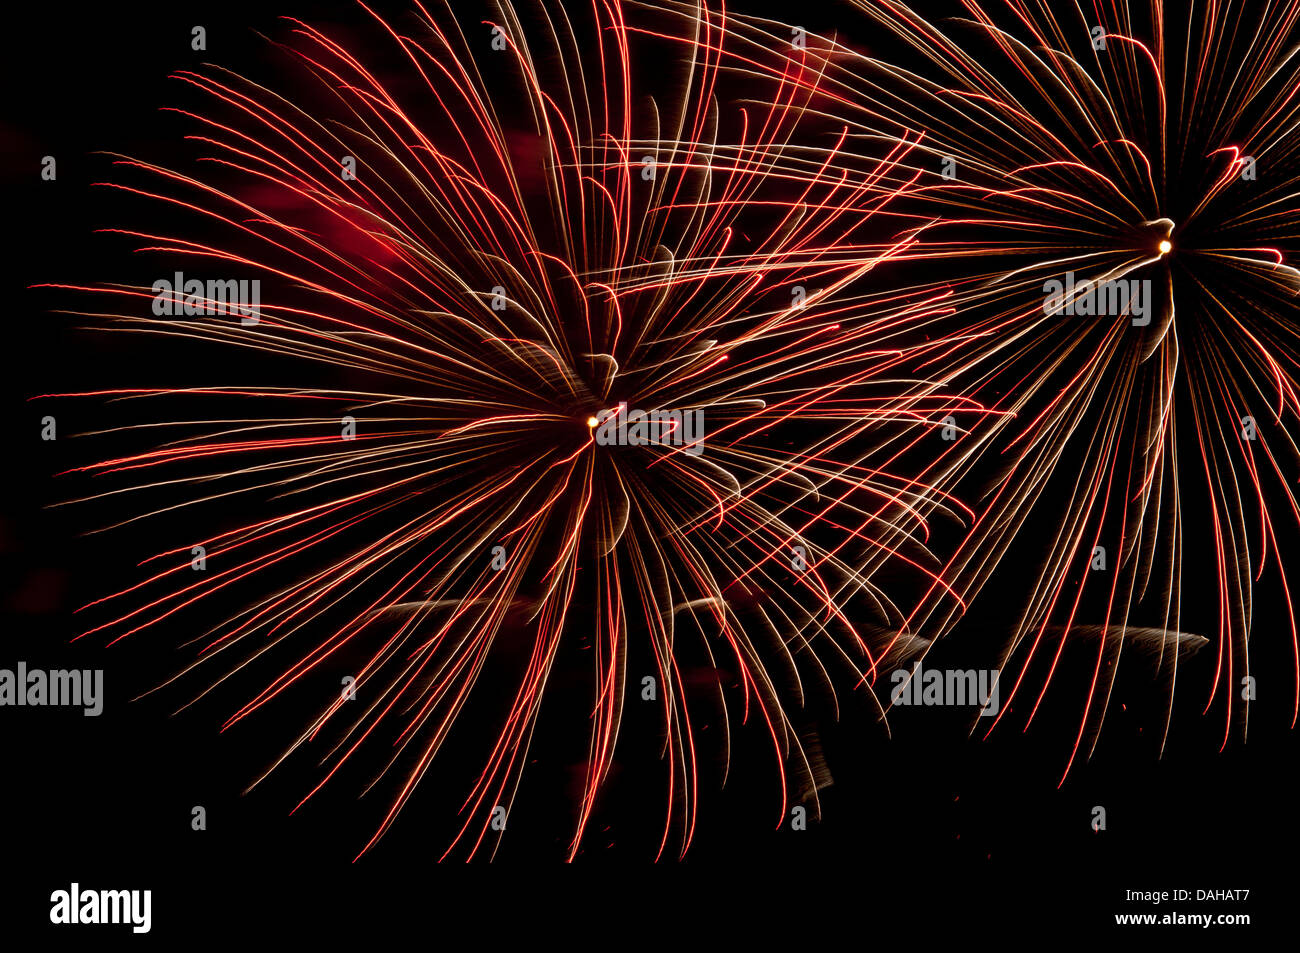 D'artifice, pyrotechnie, Carnaval, Big Bang Banque D'Images